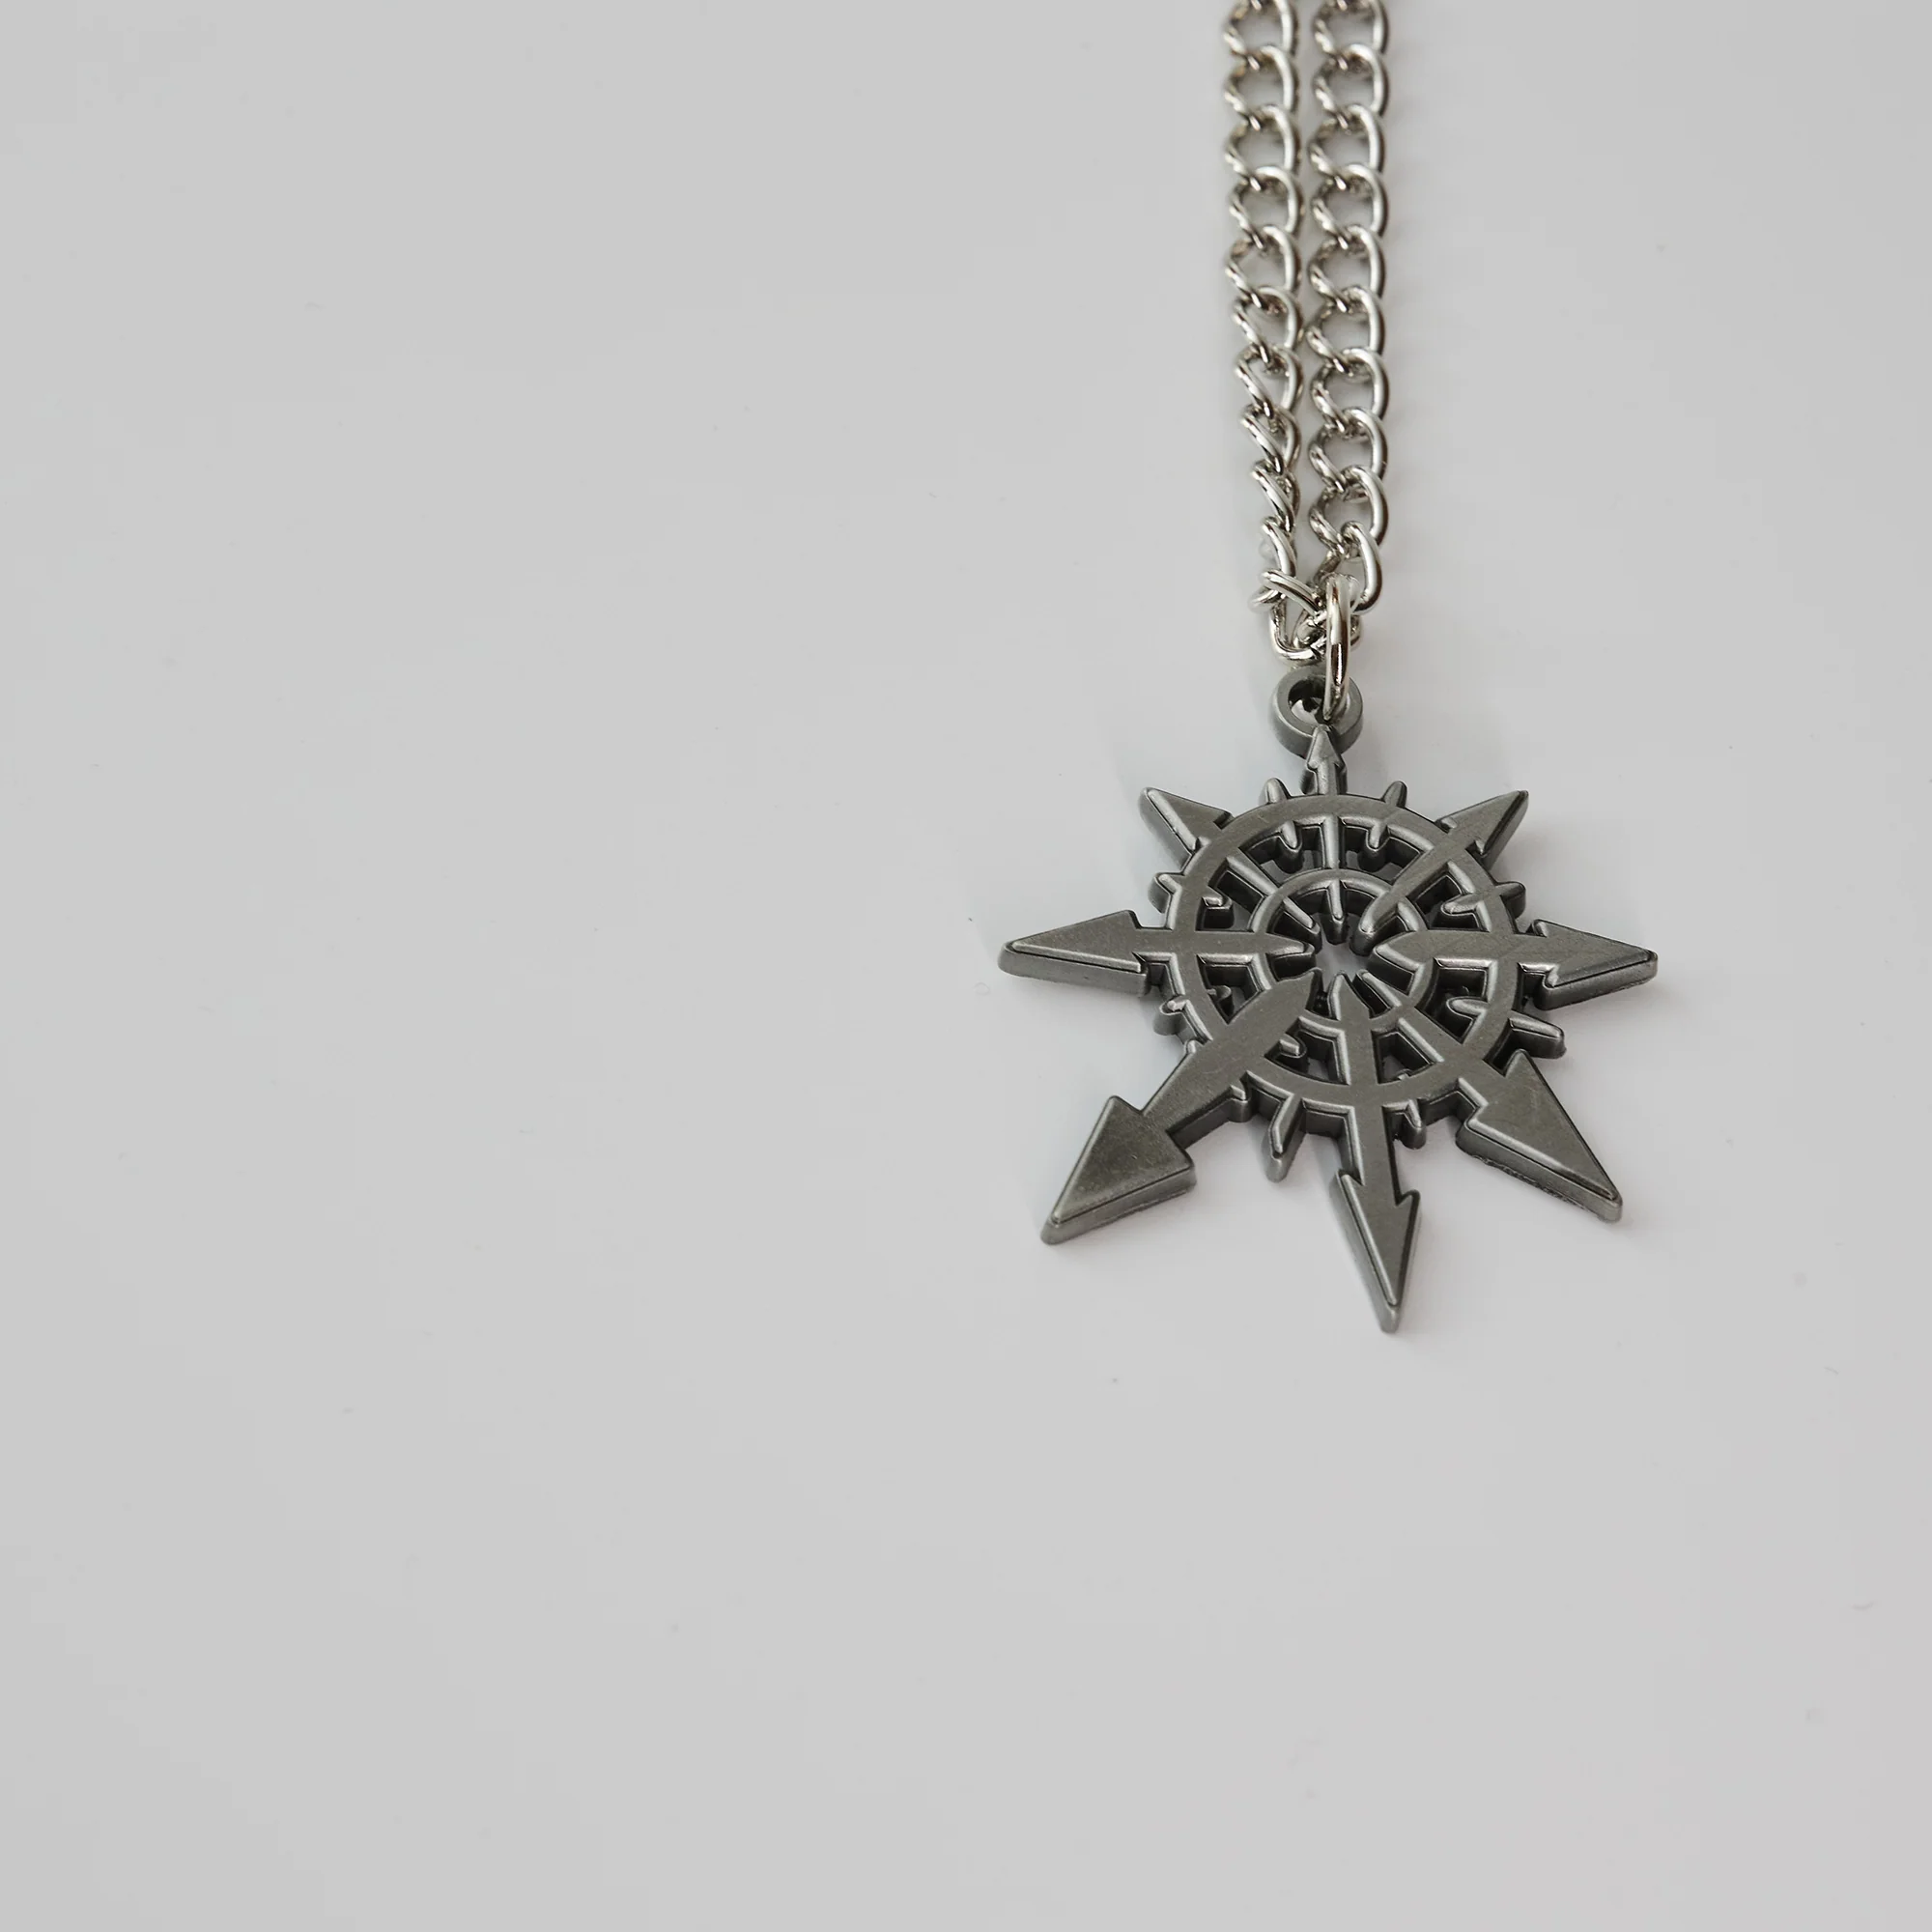 Faction Icon: Chaos Undivided Necklace-1701941765.webp